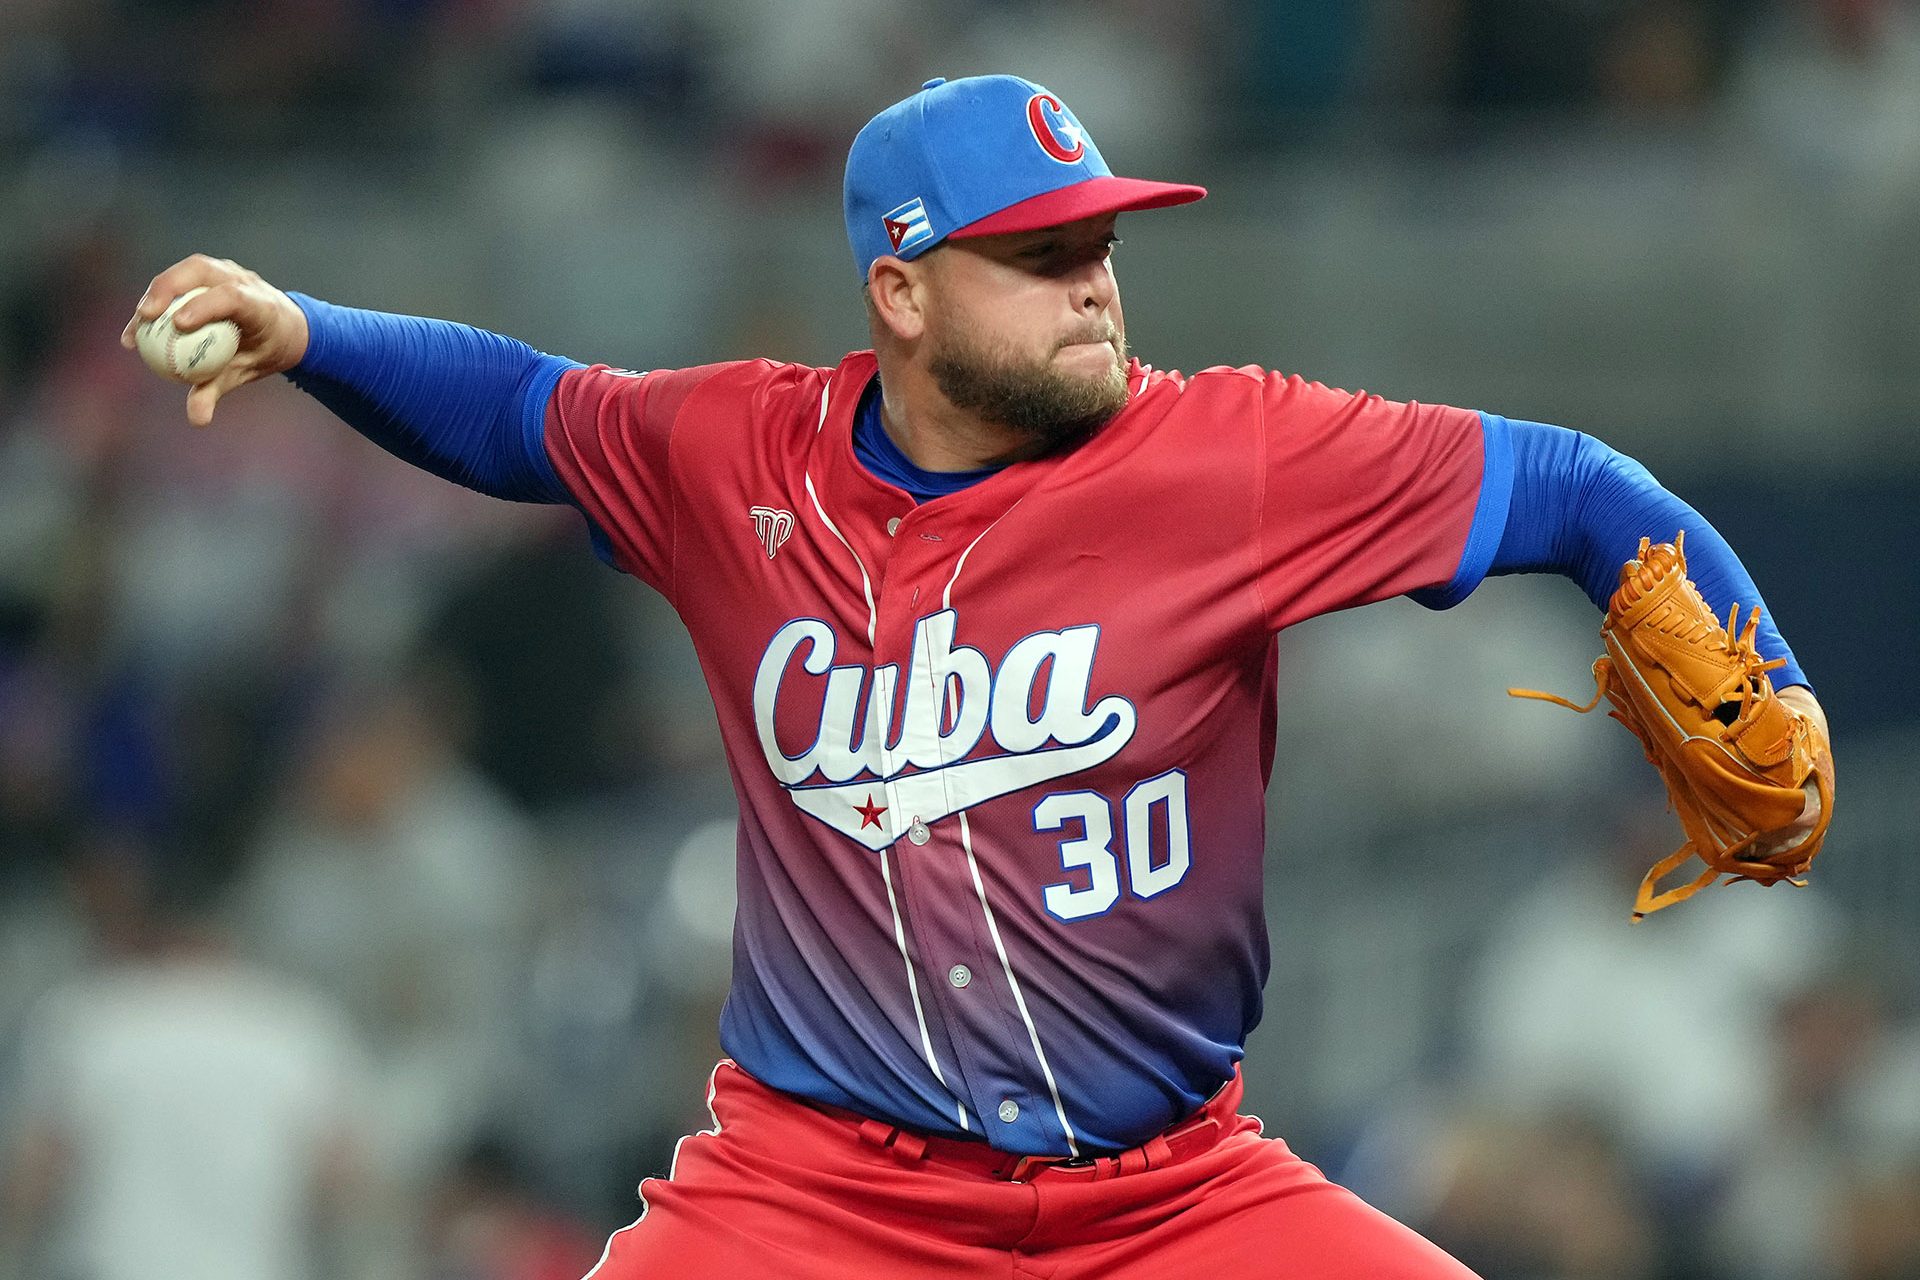 Baseball: Cuba, without a medal in the Pan American Games